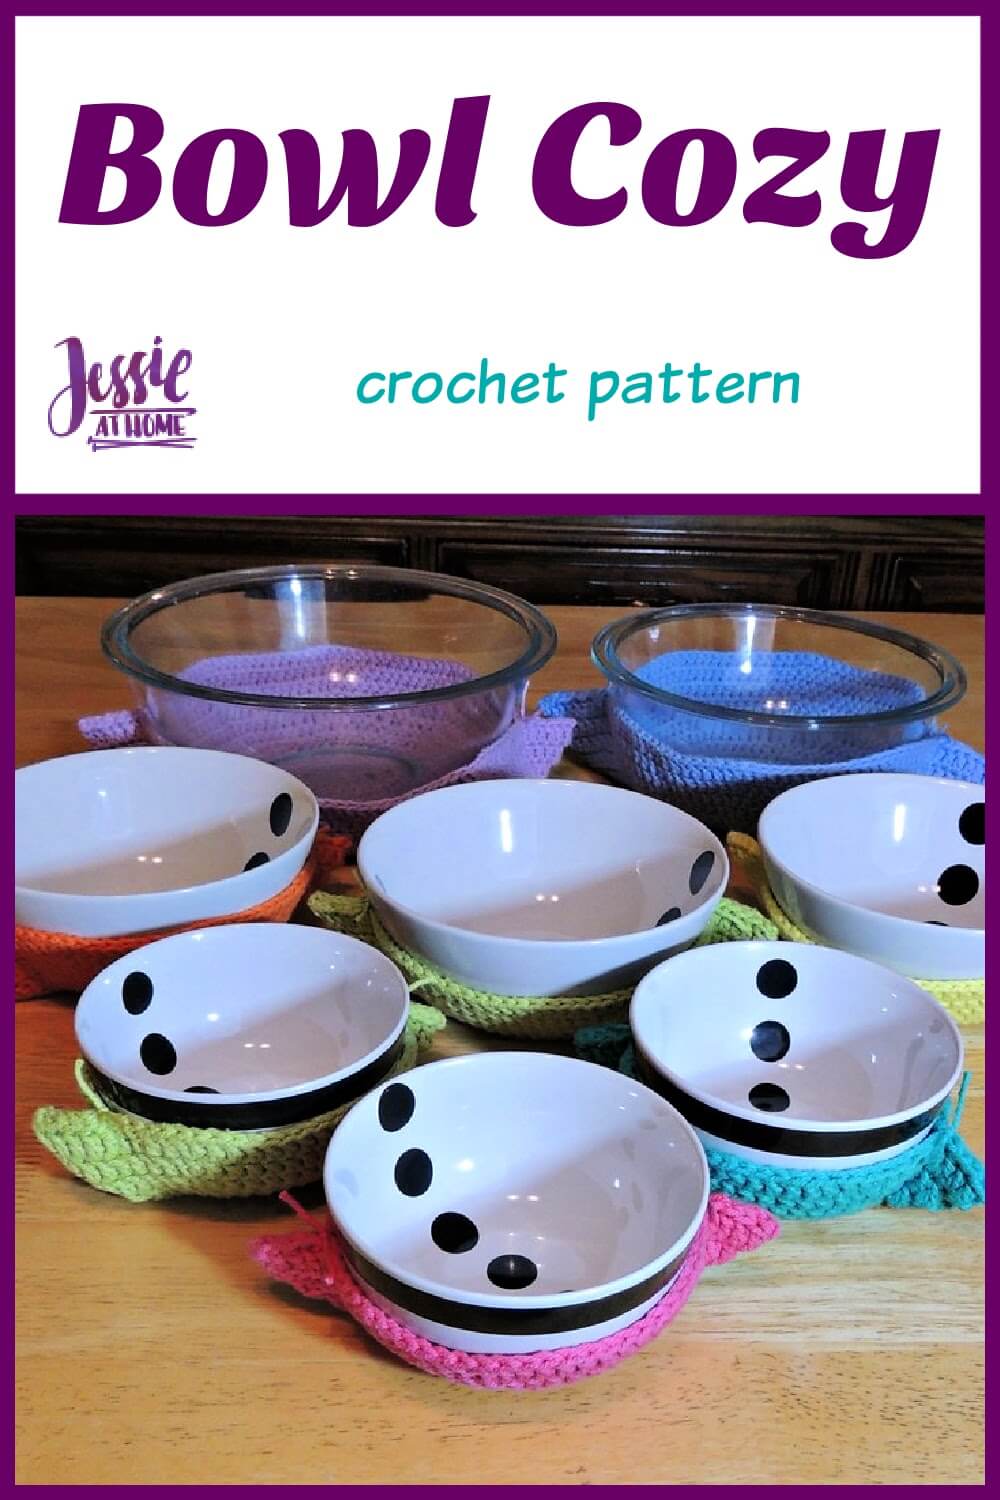 Bowl Cozy crochet pattern by Jessie At Home - Pin 1